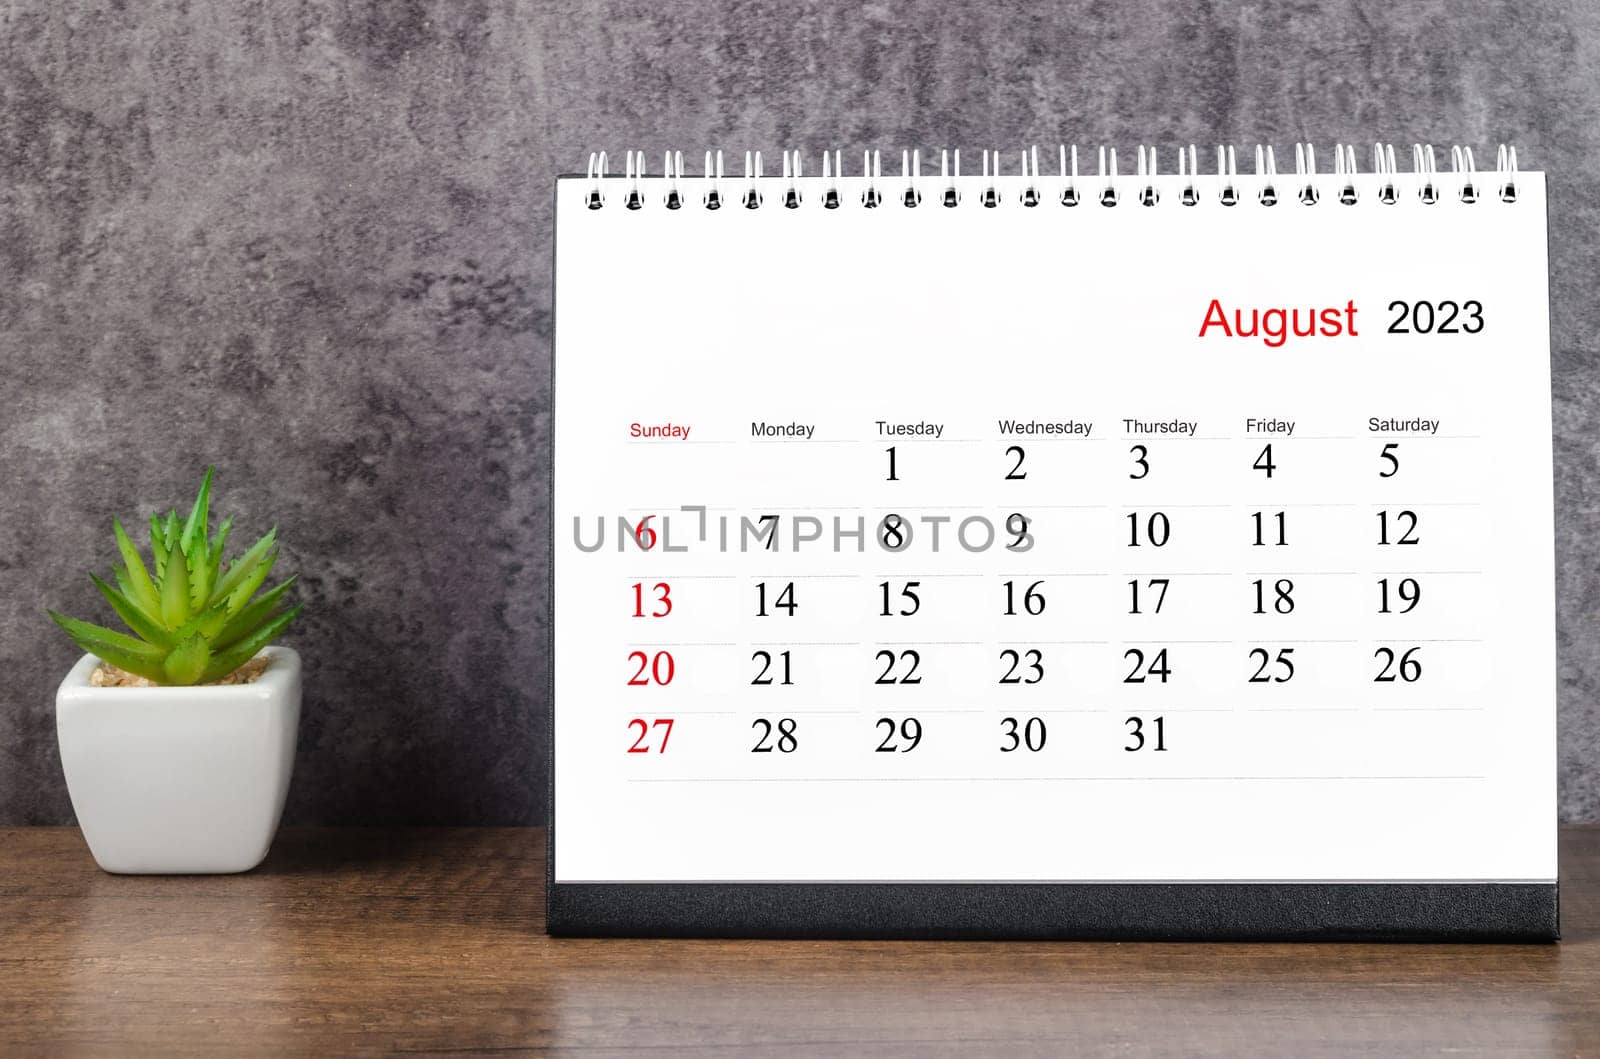 August 2023 Monthly desk calendar for 2023 year on wooden table.